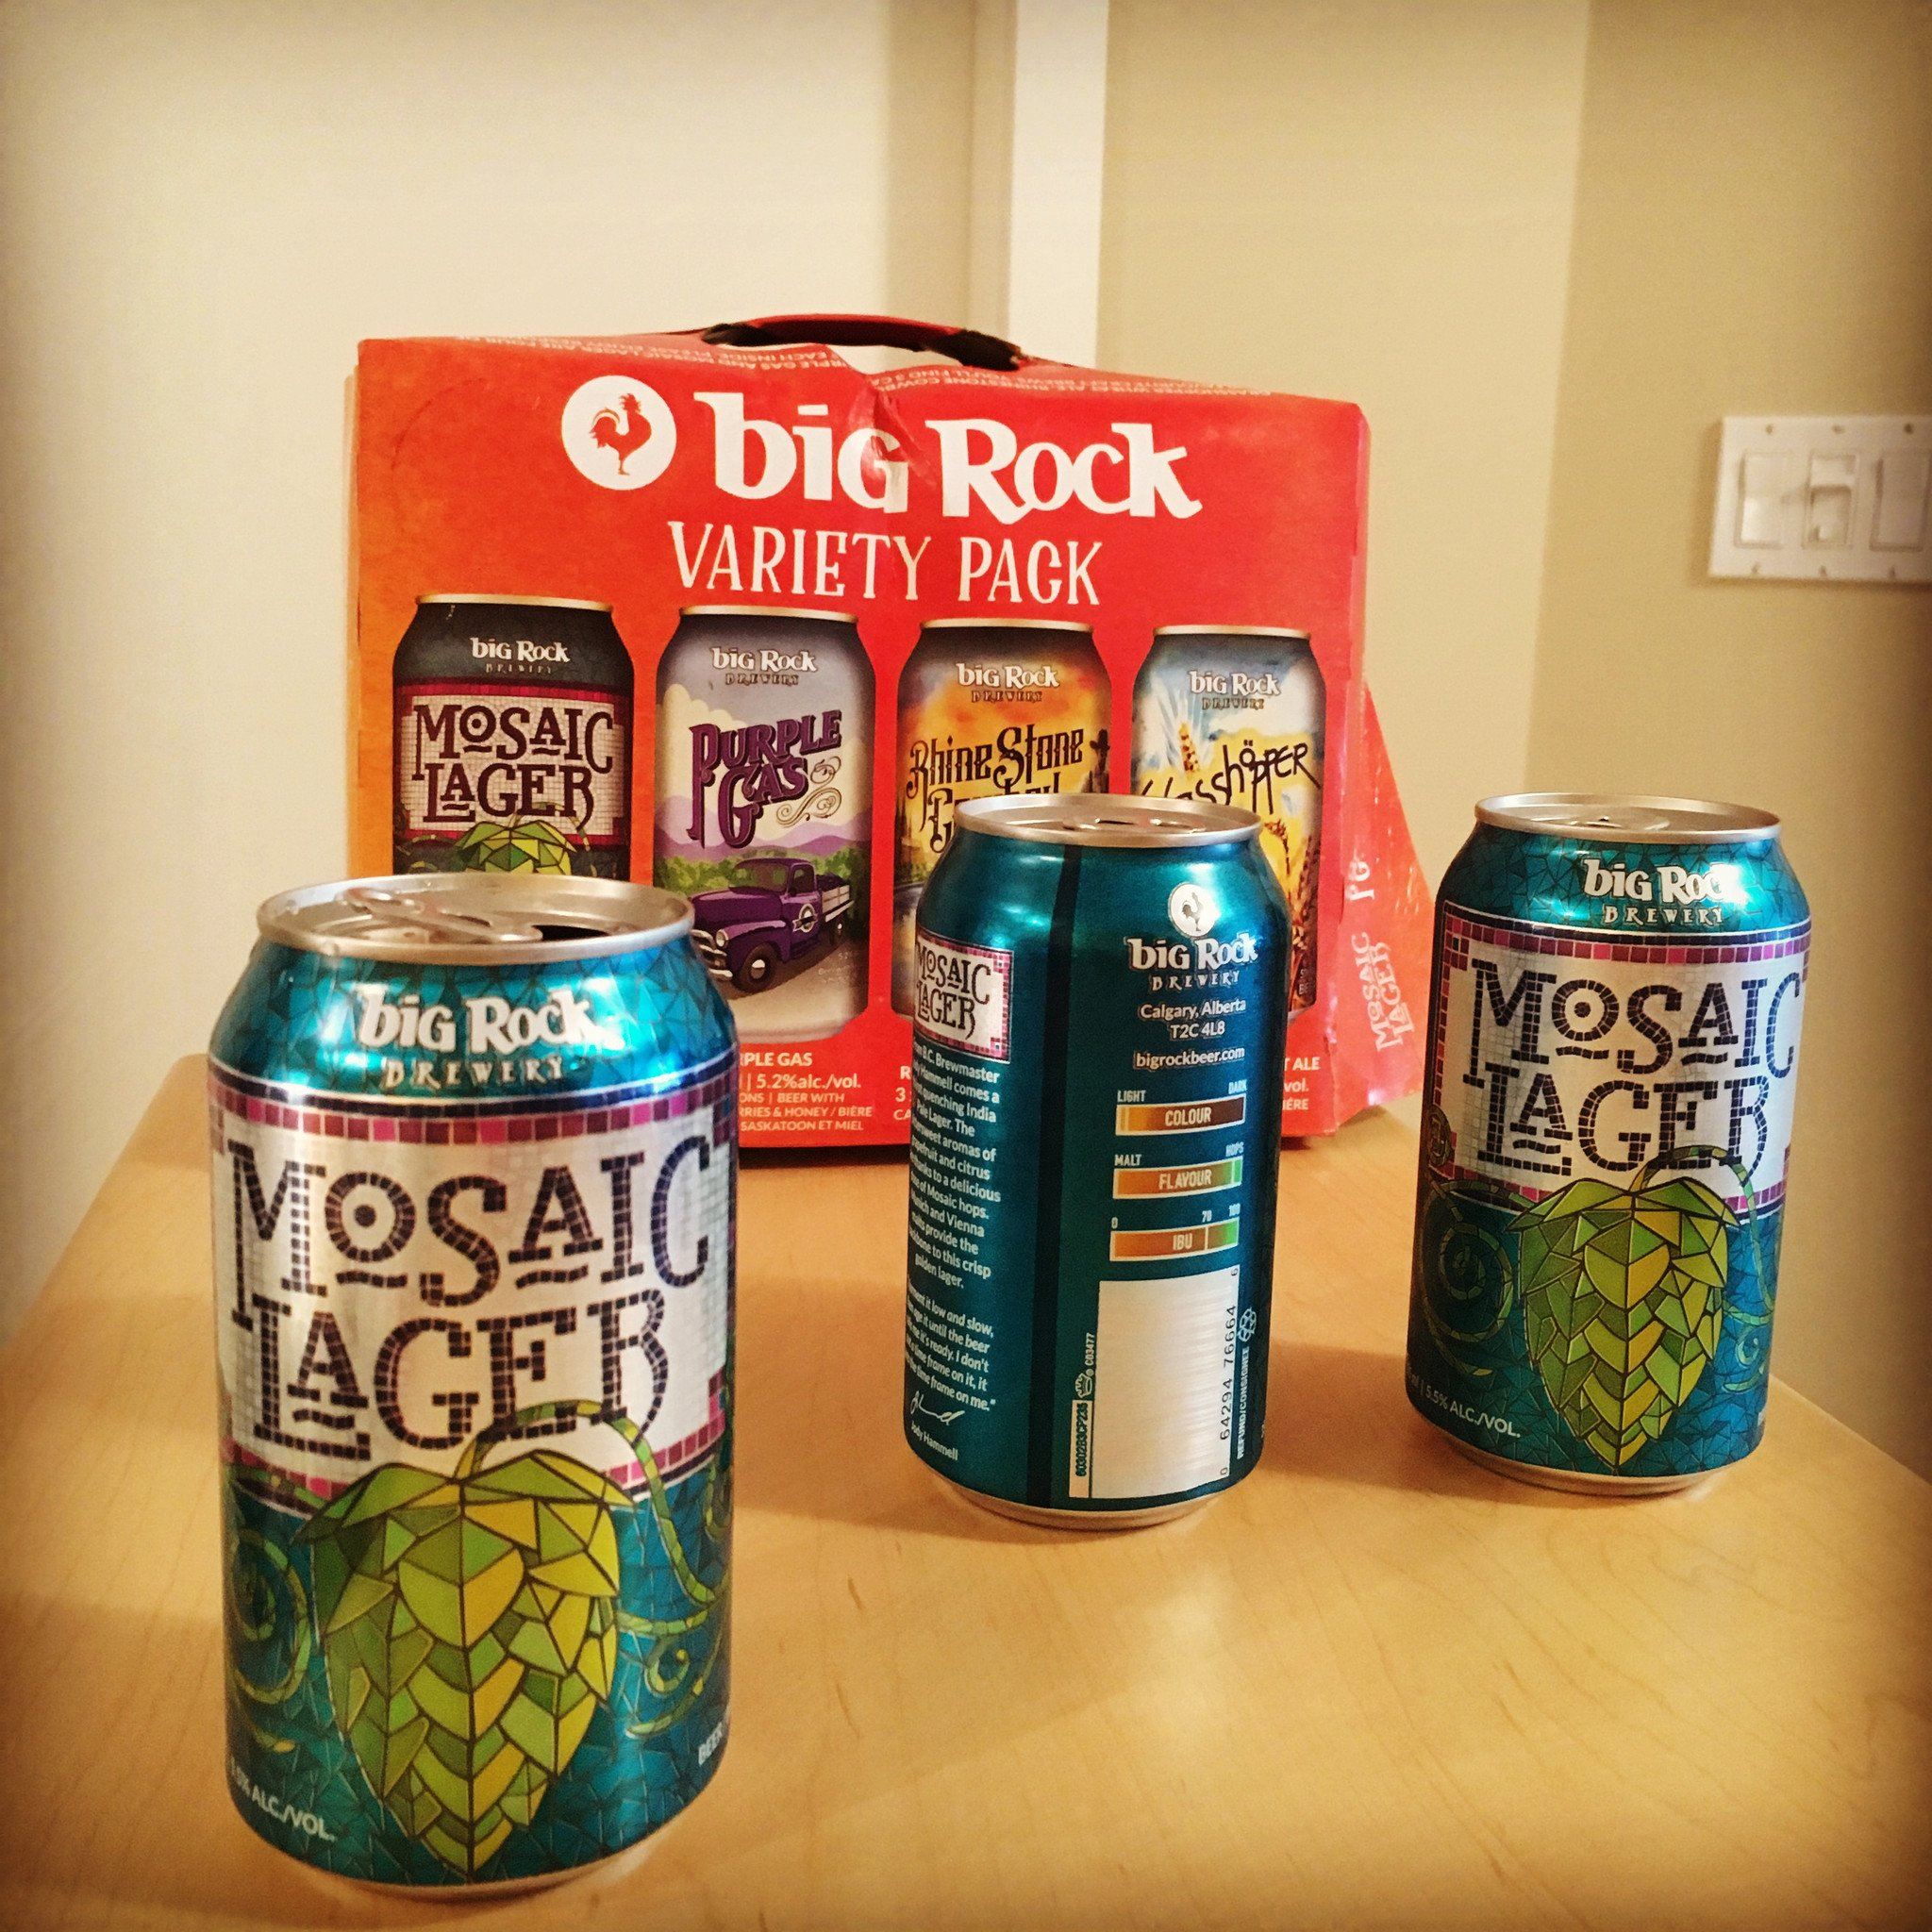 Big Rock Brewery's Mosaic Lager